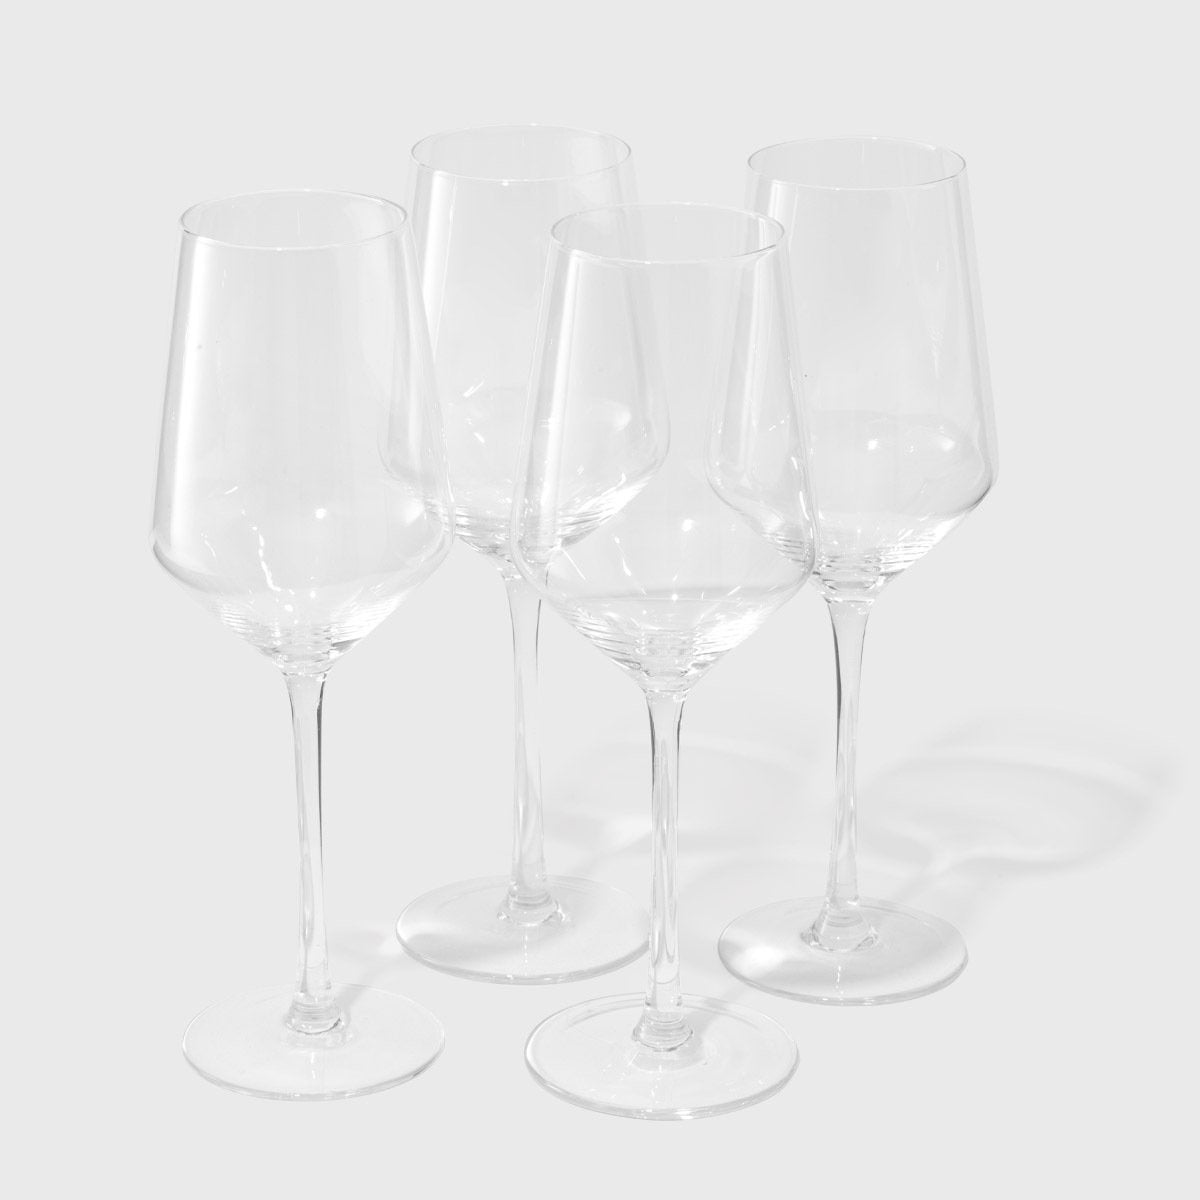 Exportshub_USA Unique Wine Glasses - Clear, 180ml Set of 4, Cocktail  Glasses